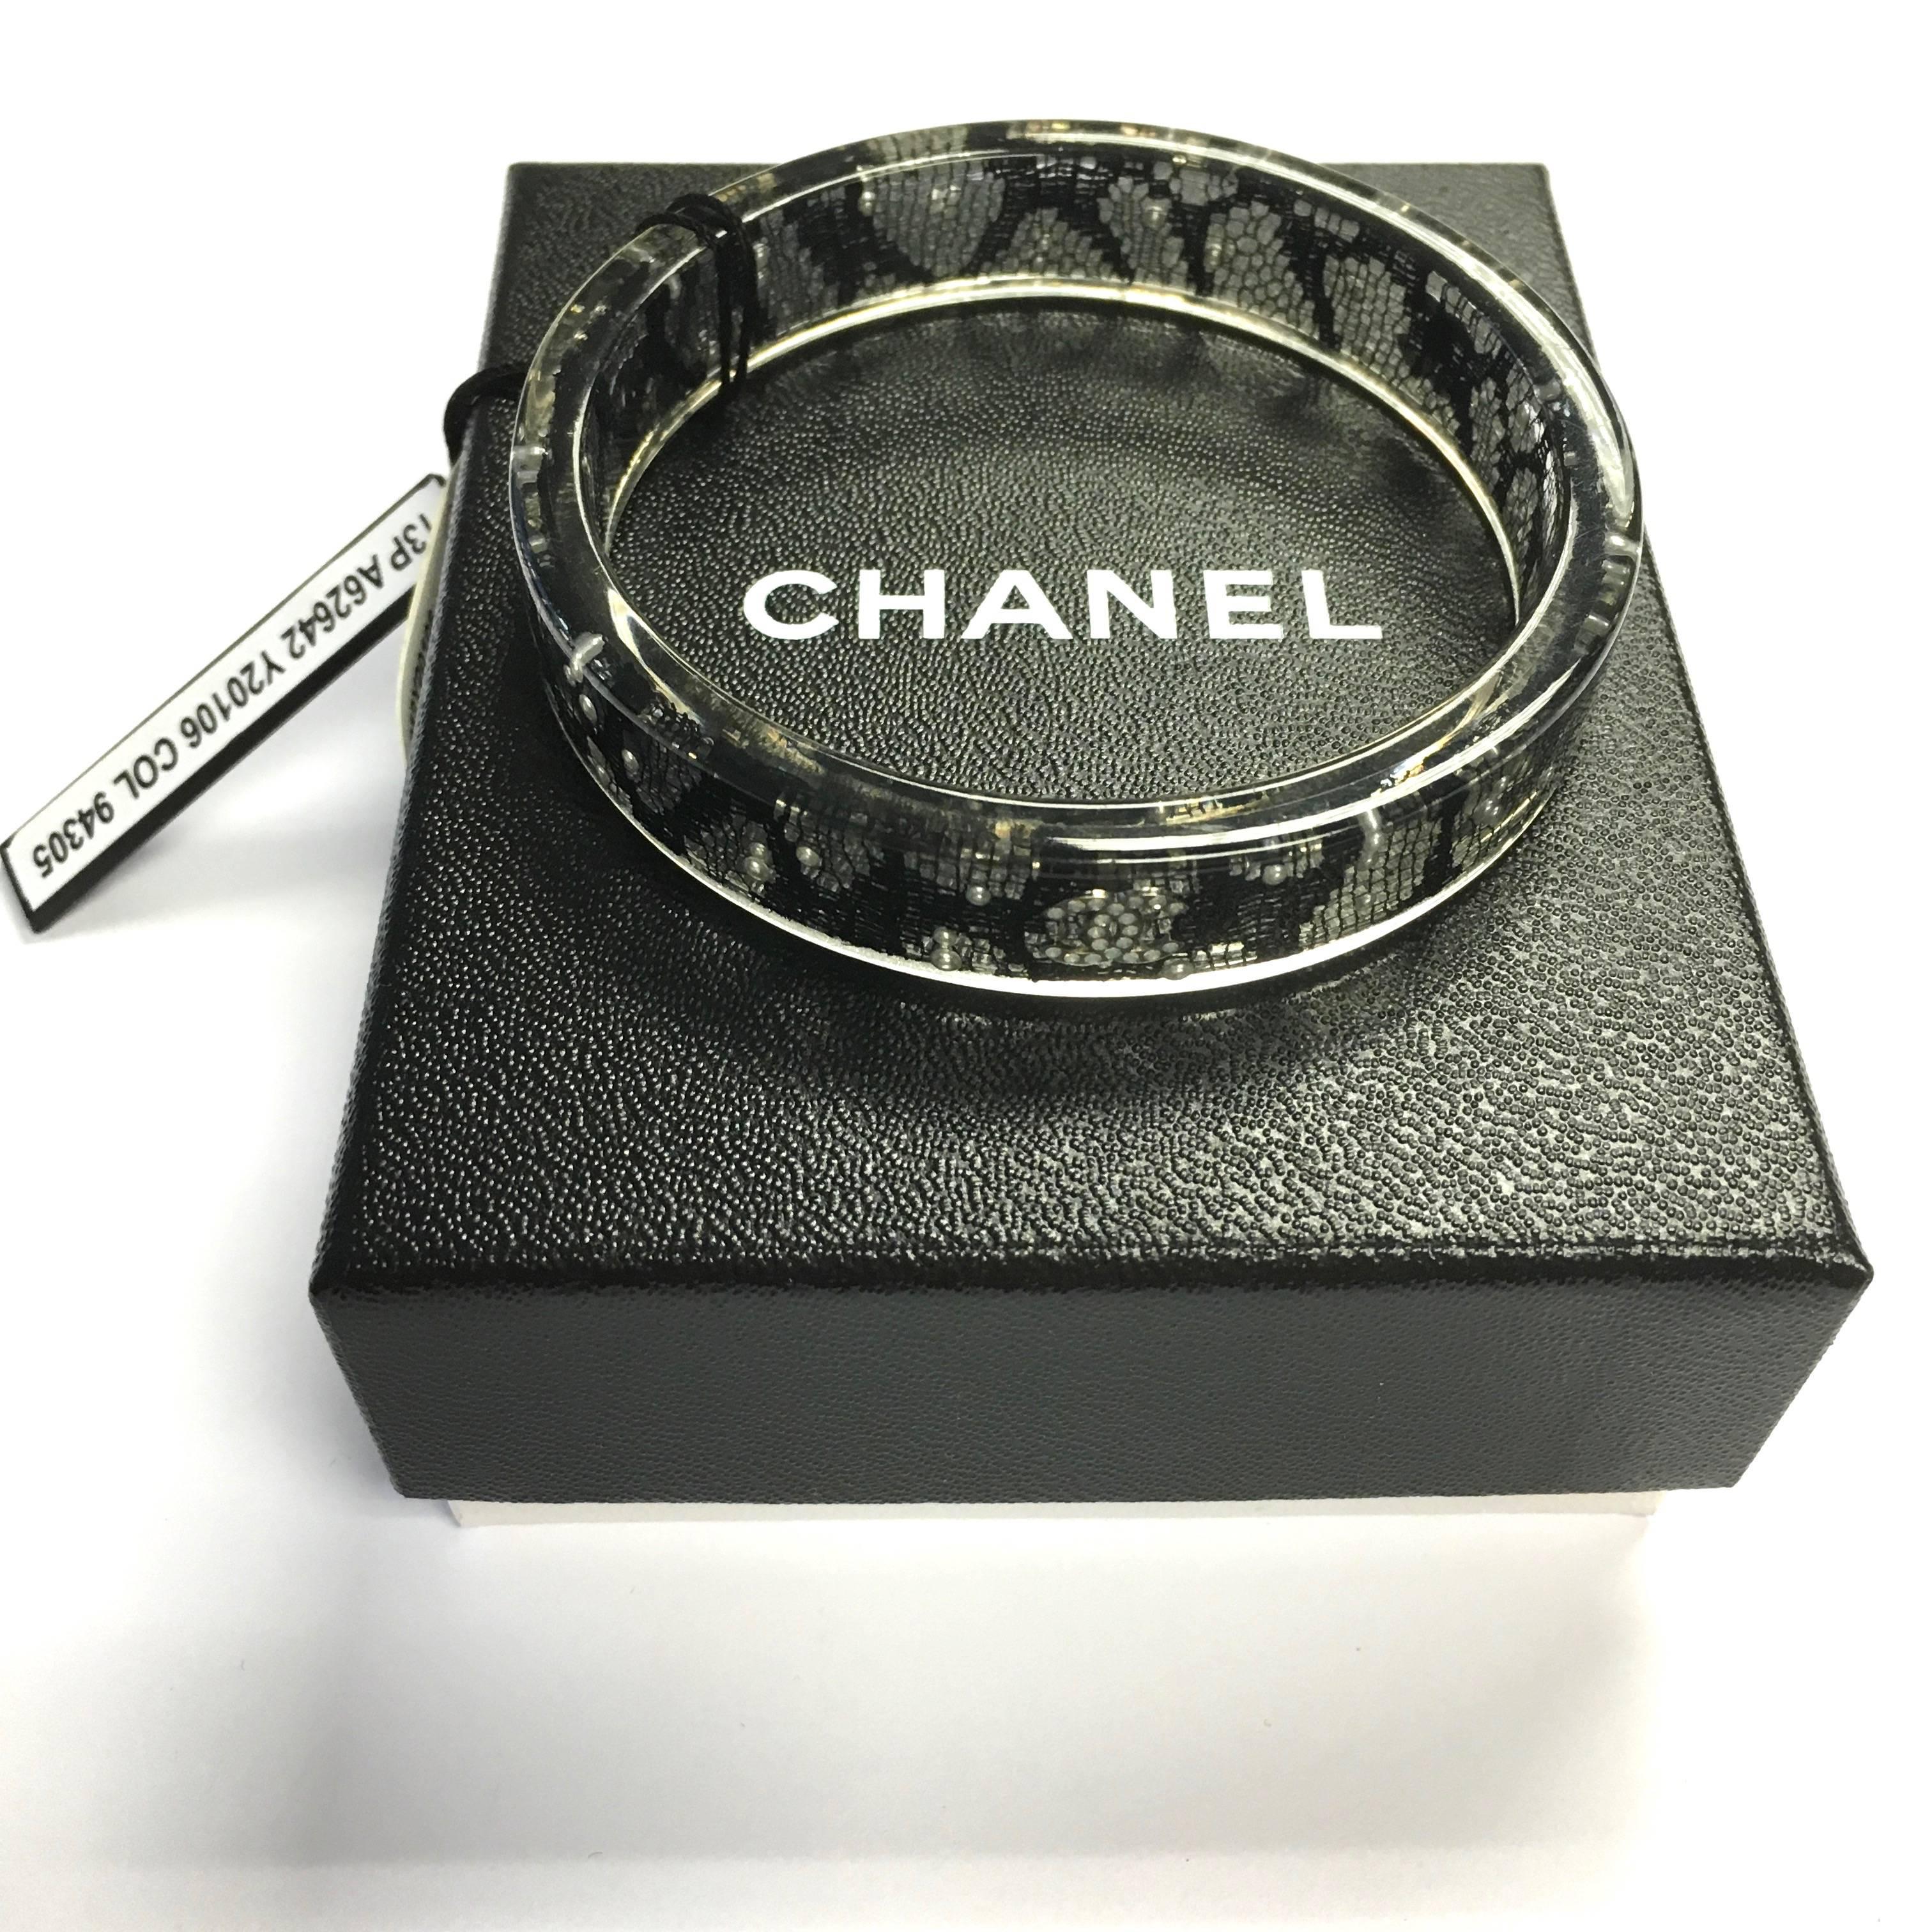 Authentic CHANEL Resin Black Lace Pearl Bangle Bracelet From Spring 2013P Collection  RARE
Clear resin with black lace, faux pearls and clear crystals encased inside the resin. Gorgeous piece, very feminine but with a modern edge! Branded with